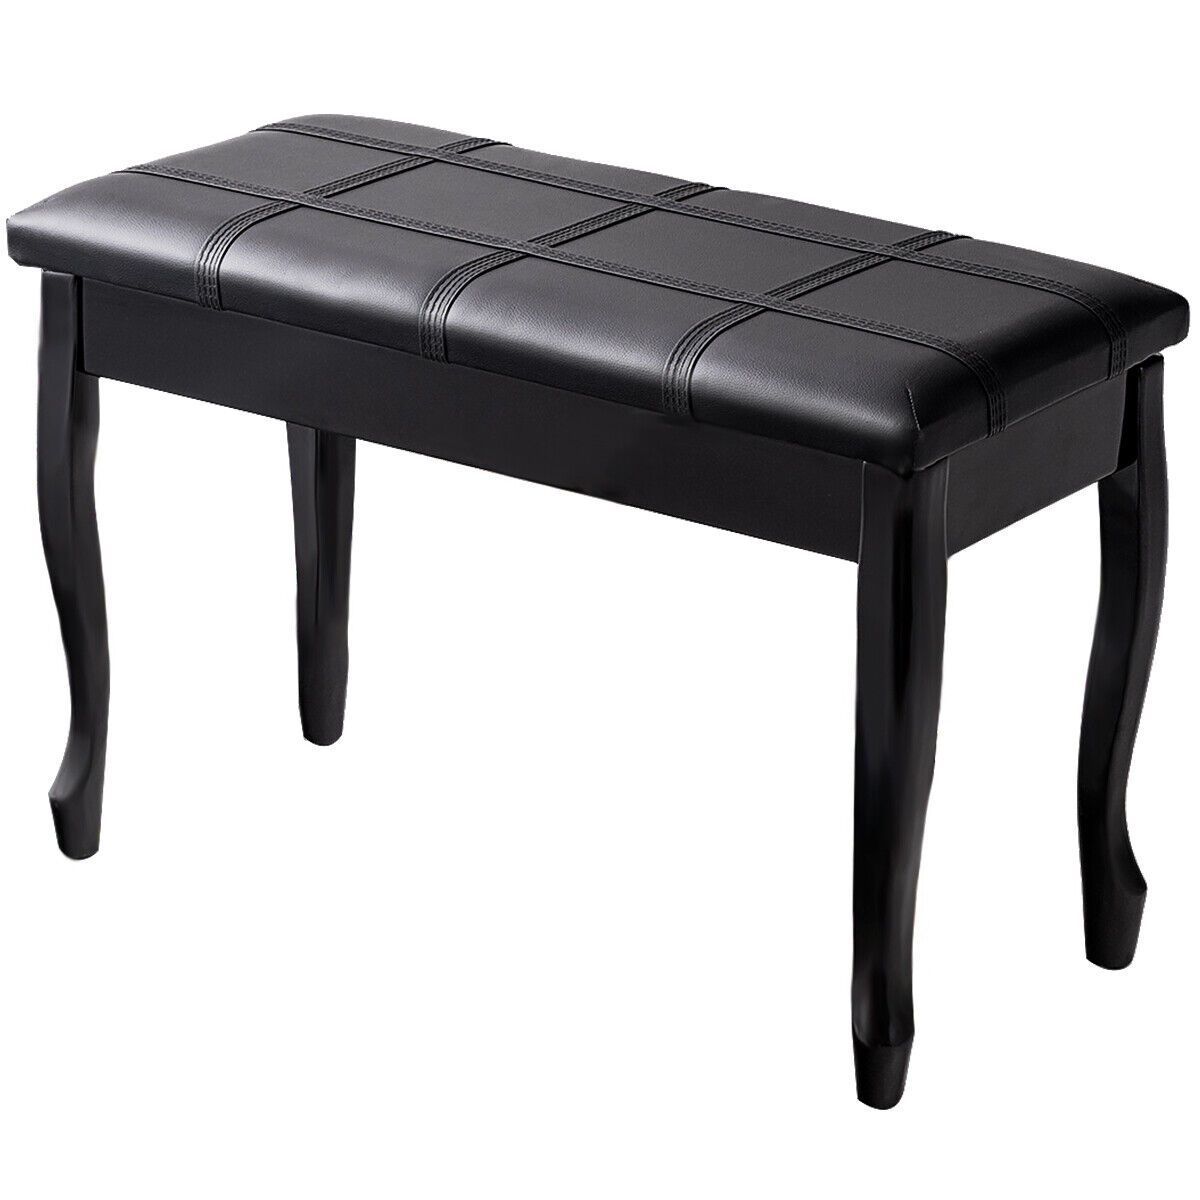 Leather Piano Bench with Storage Compartment and Wooden Legs Black